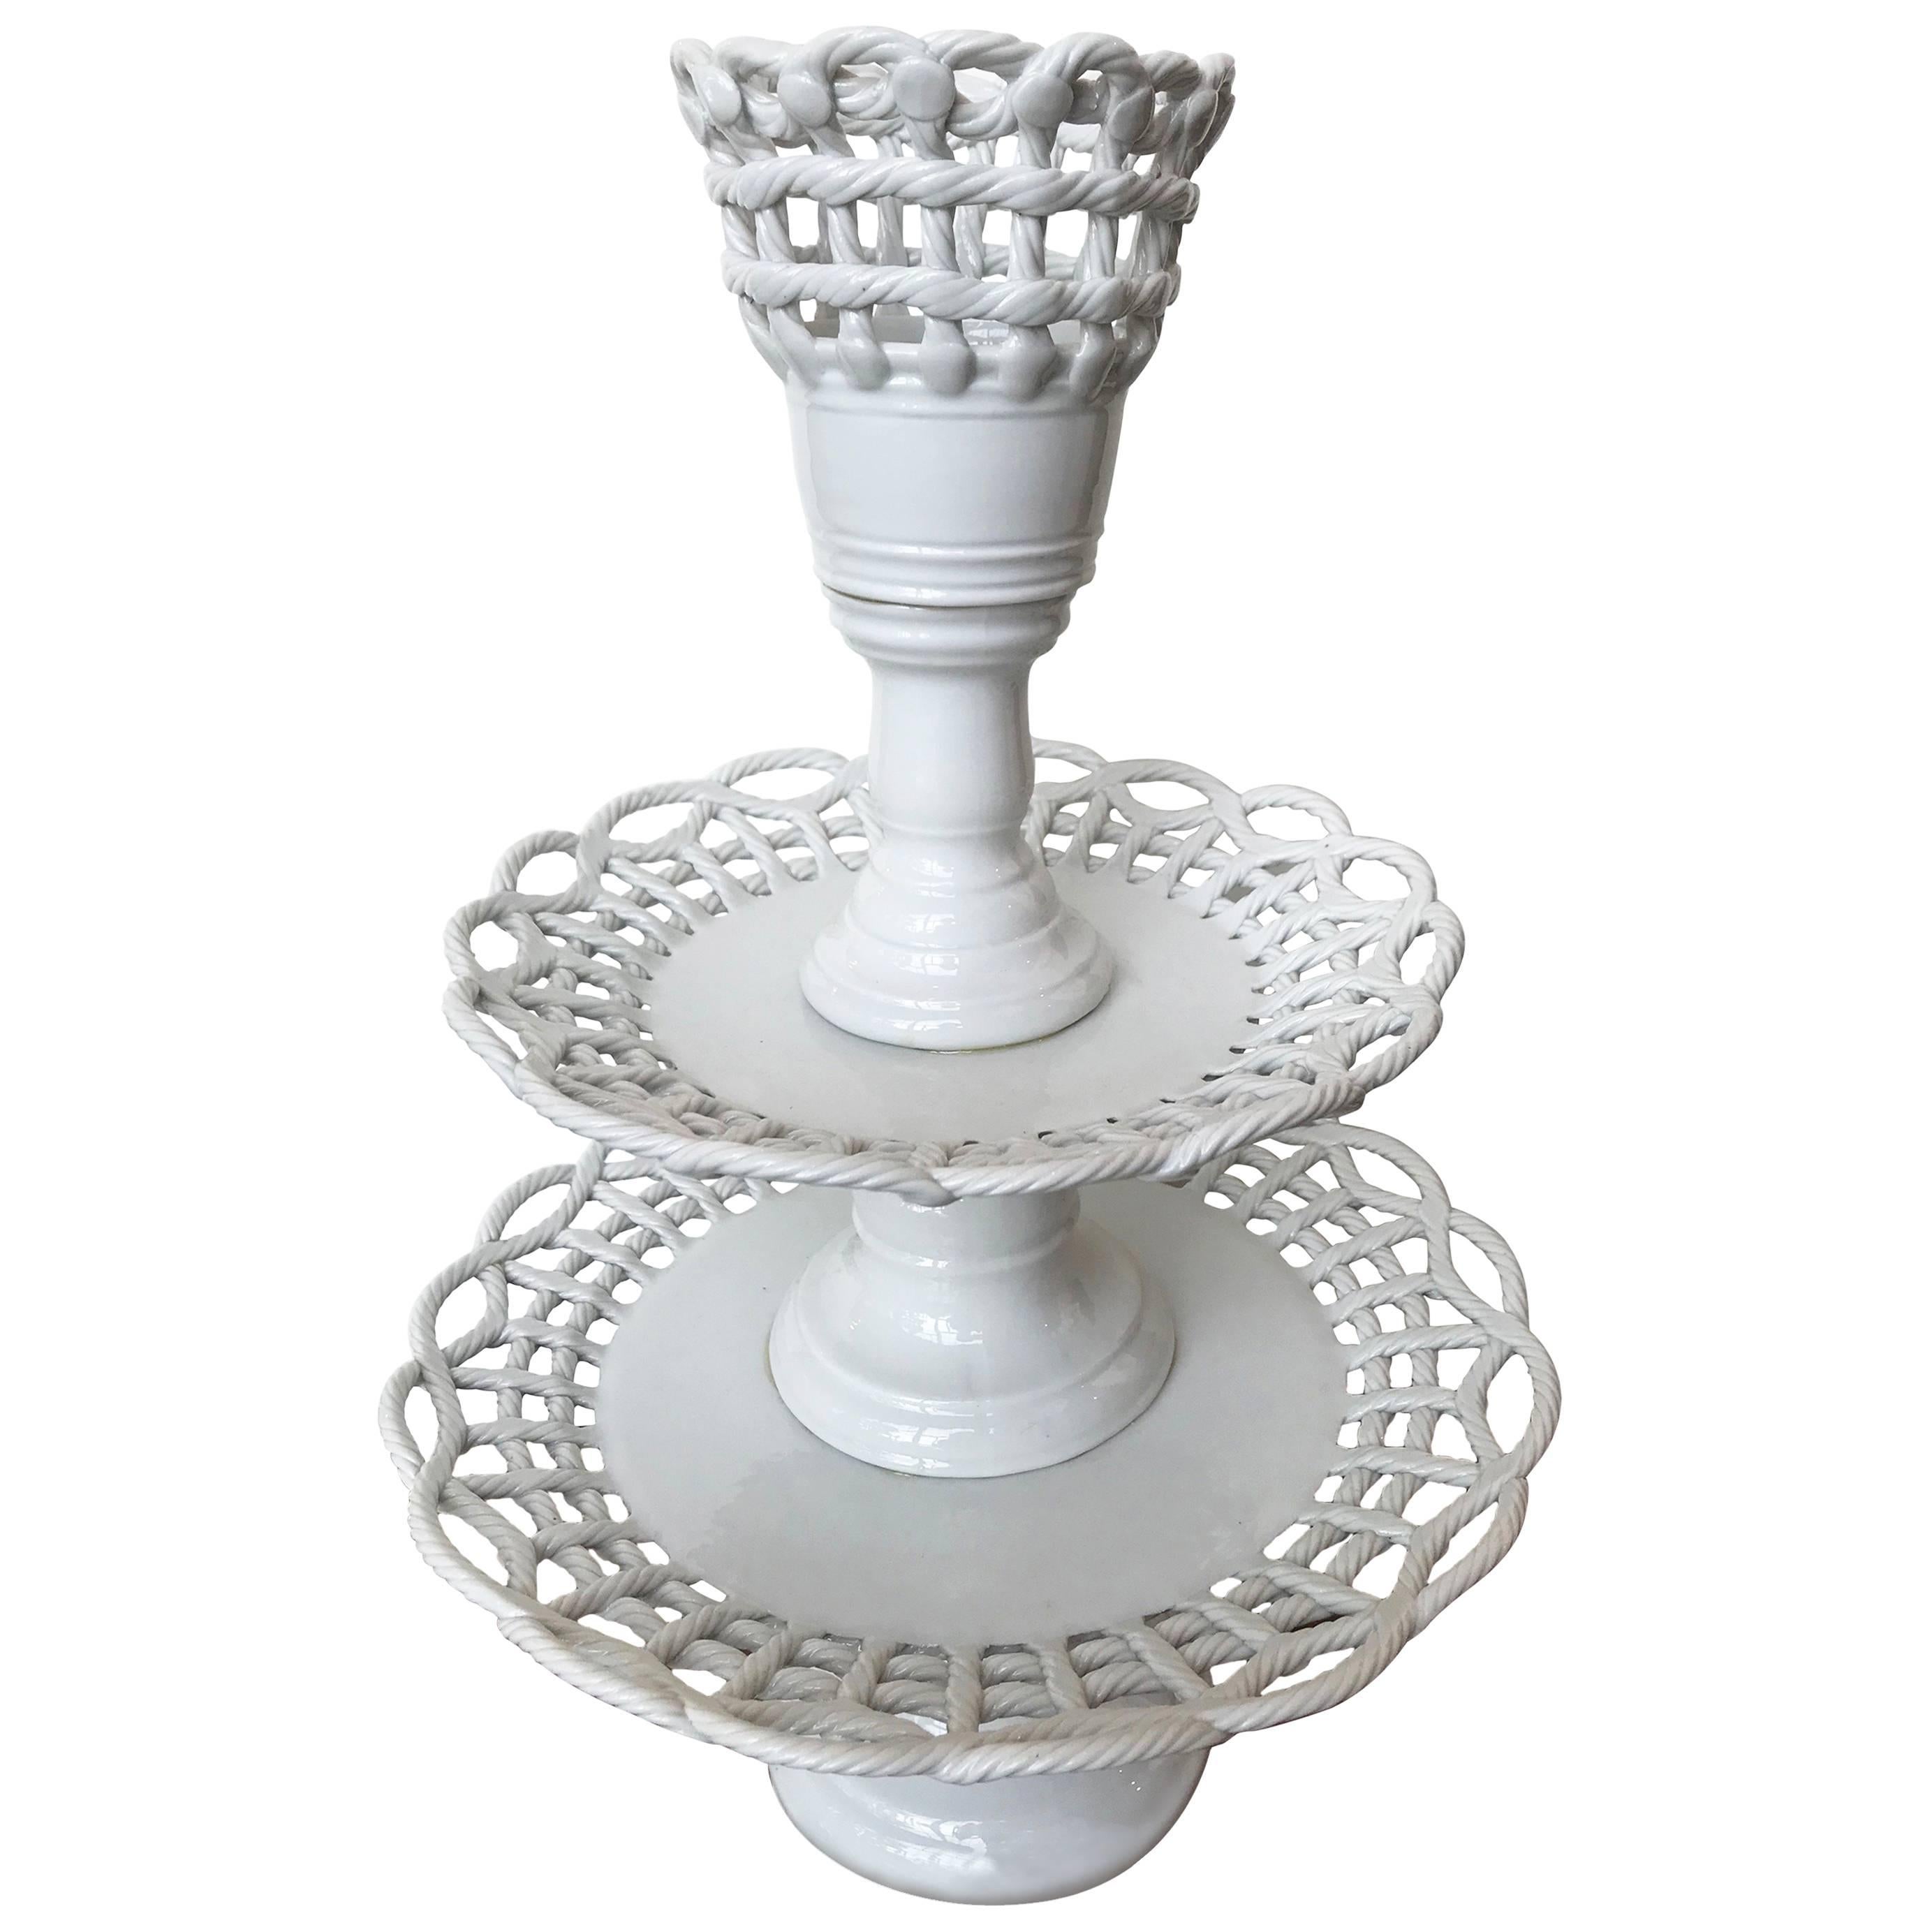 Porcelain Three-Tiered Candy Dish